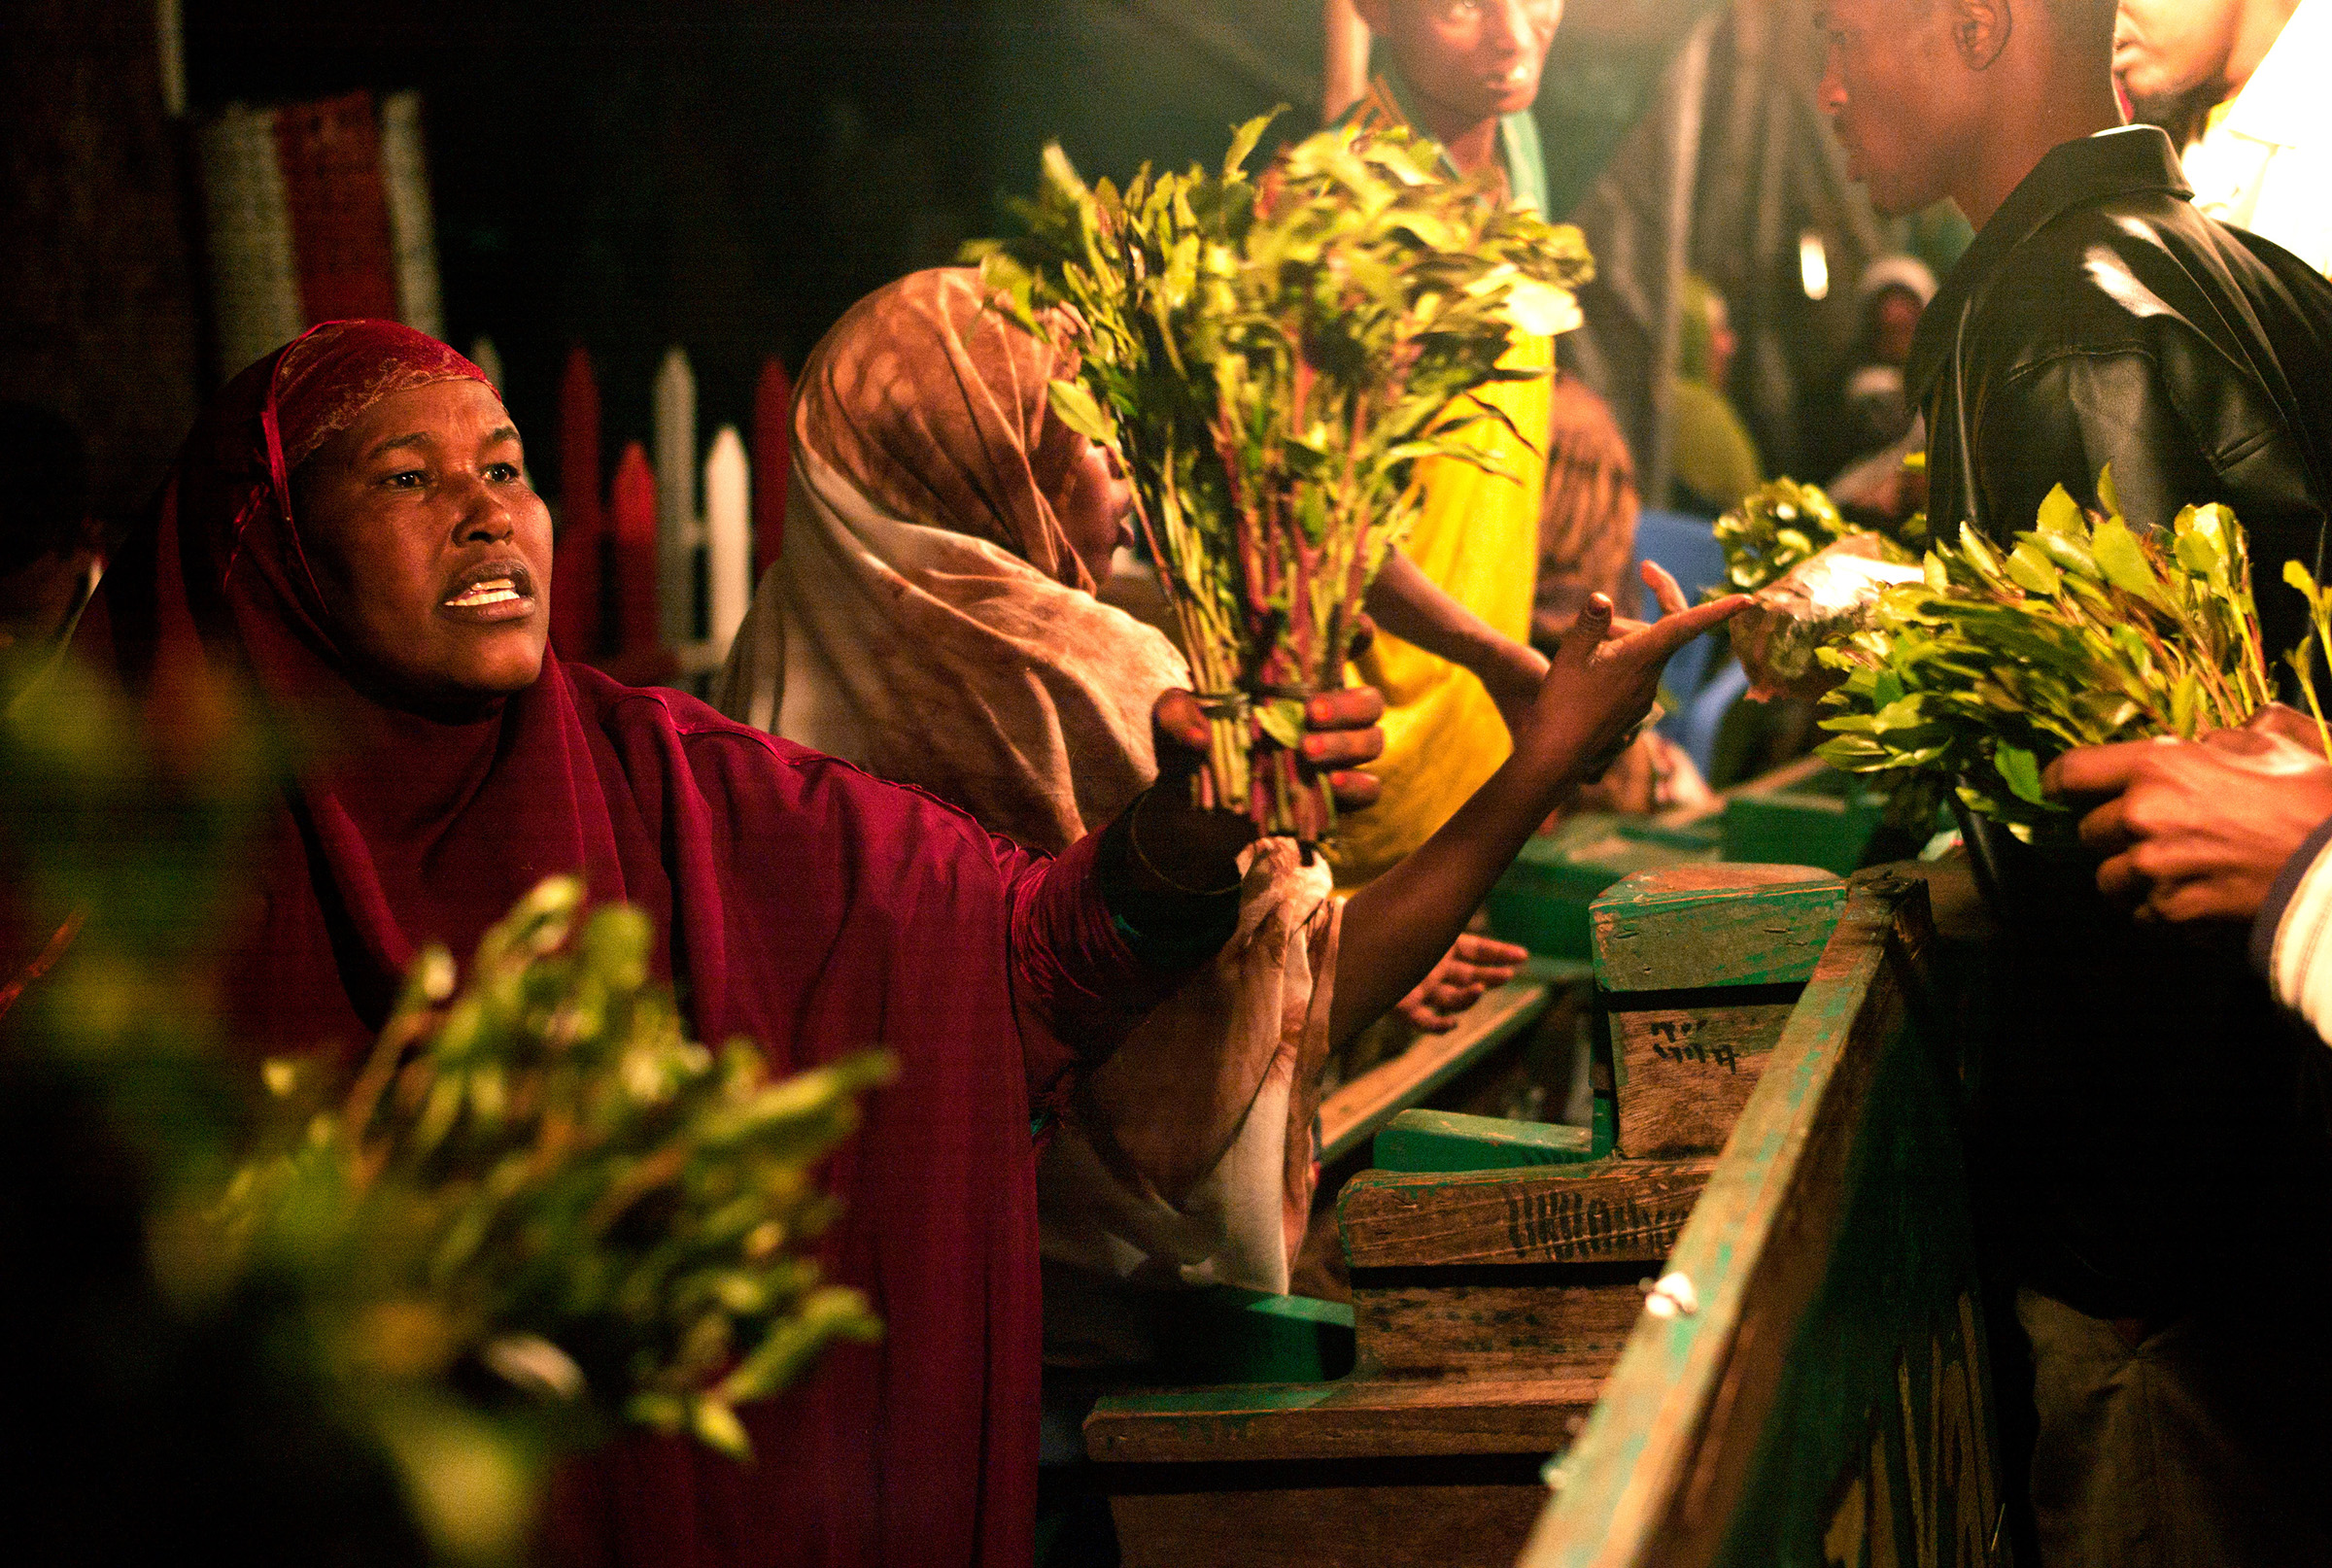 A woman holds a bunch of khat out for sale on her stall in a khat nightmarket in Hargeisa, Somaliland in 2008. The khat is imported by truck from Harar in Ethiopia. (Pascal Maitre—Panos Pictures/Redux)